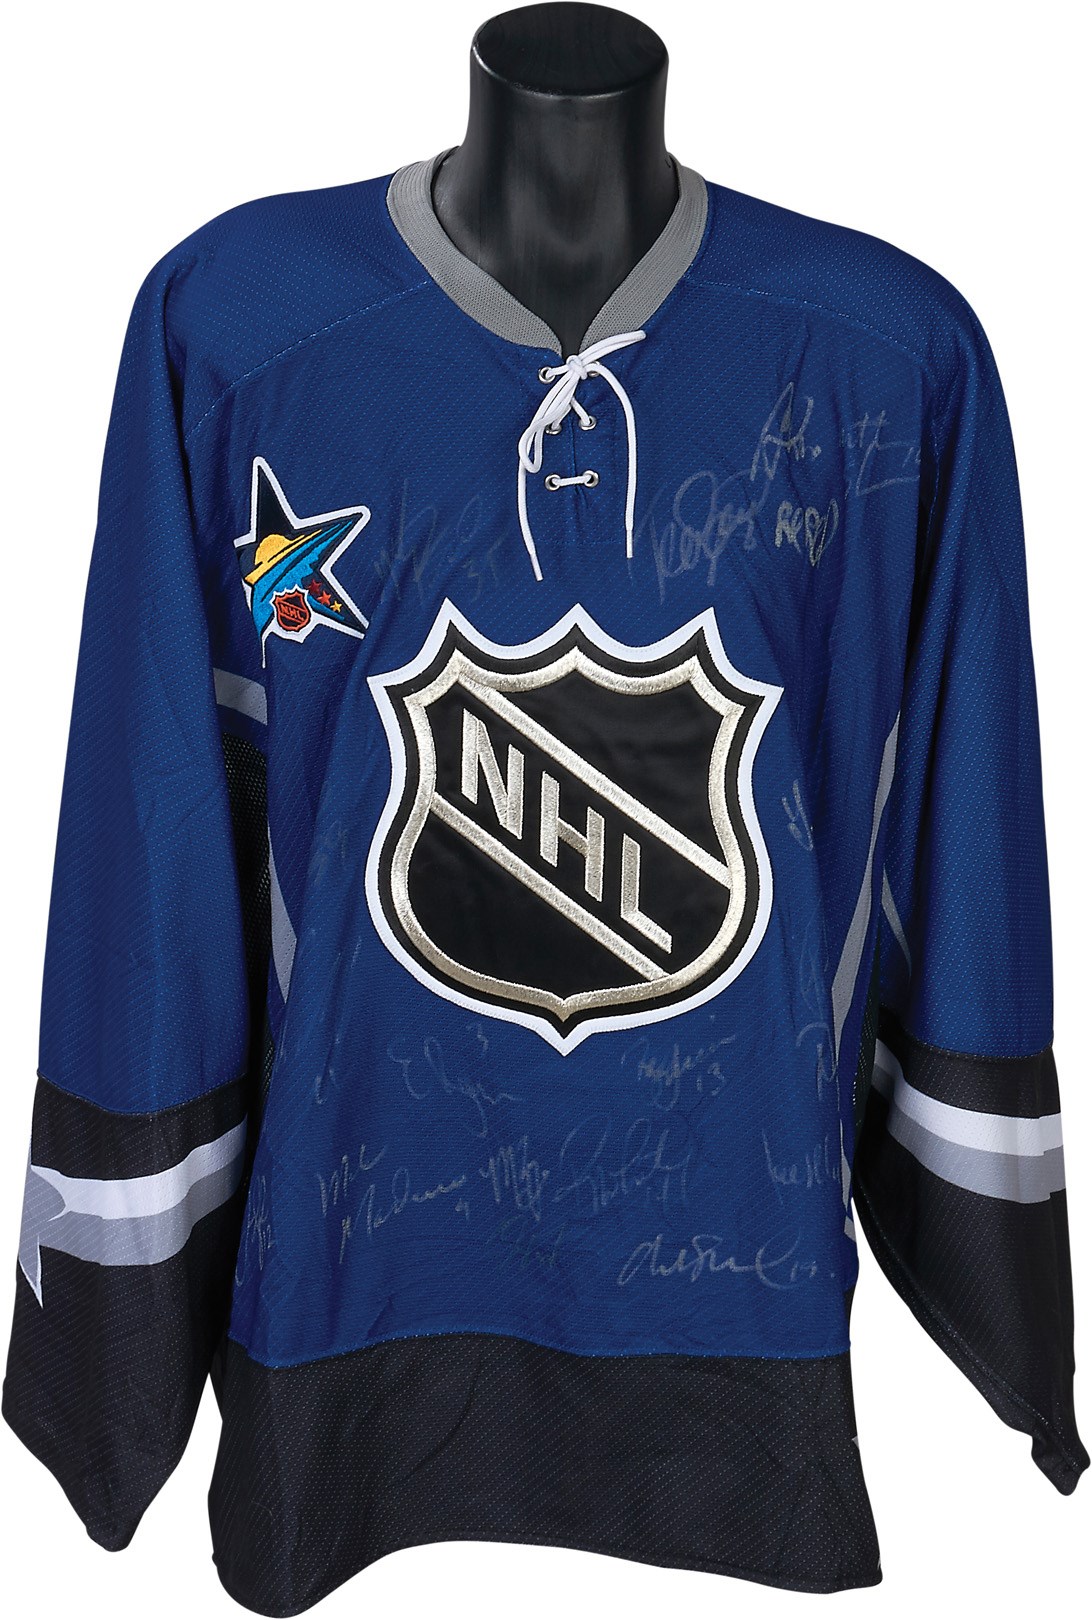 - 2002-03 NHL Western Conference All-Star Team-Signed Jersey